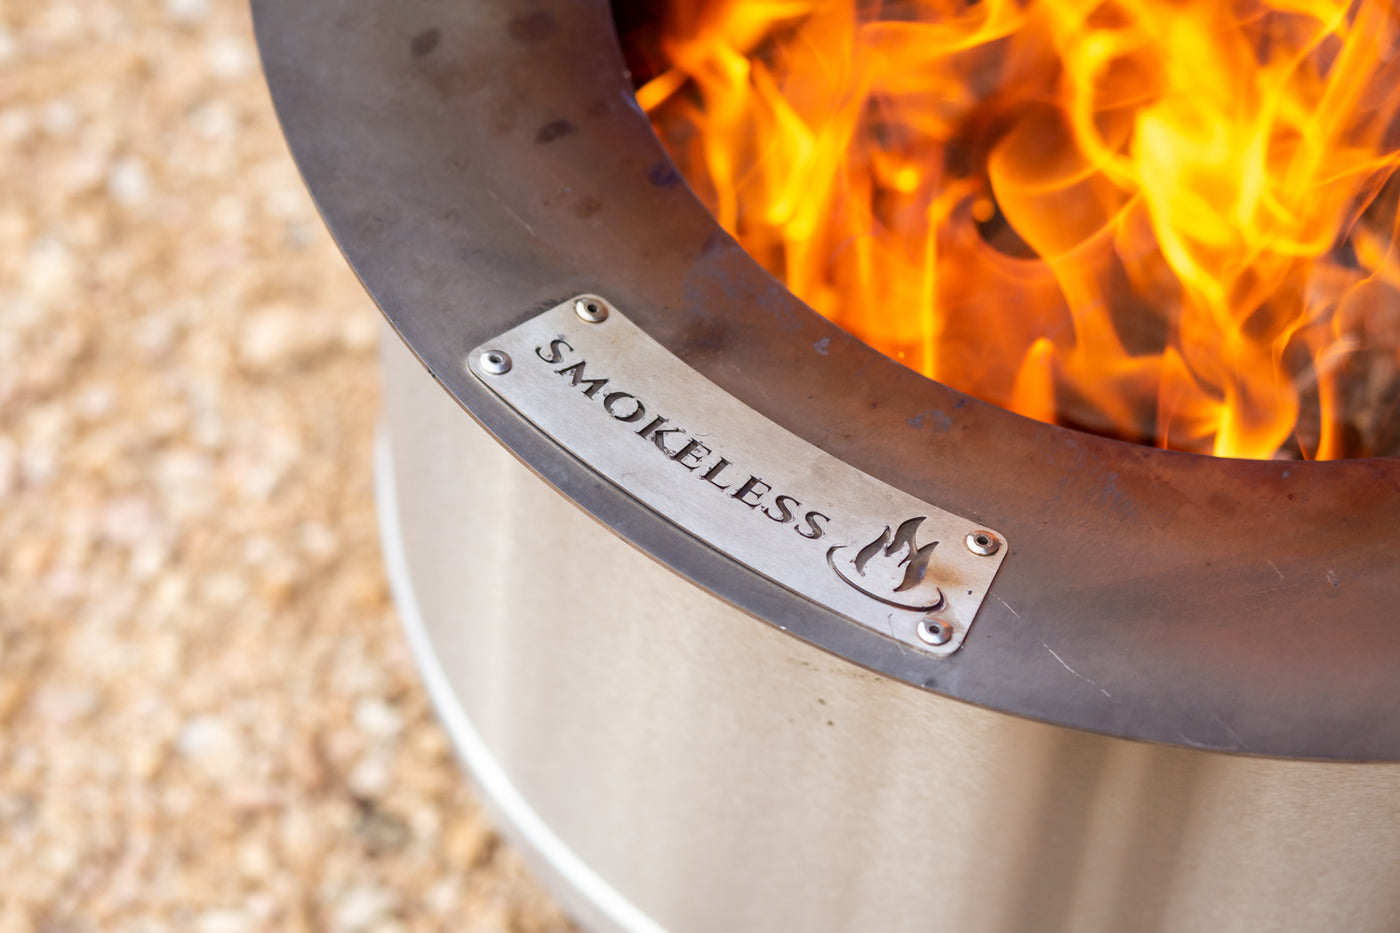 The Scout | Smokeless Fire